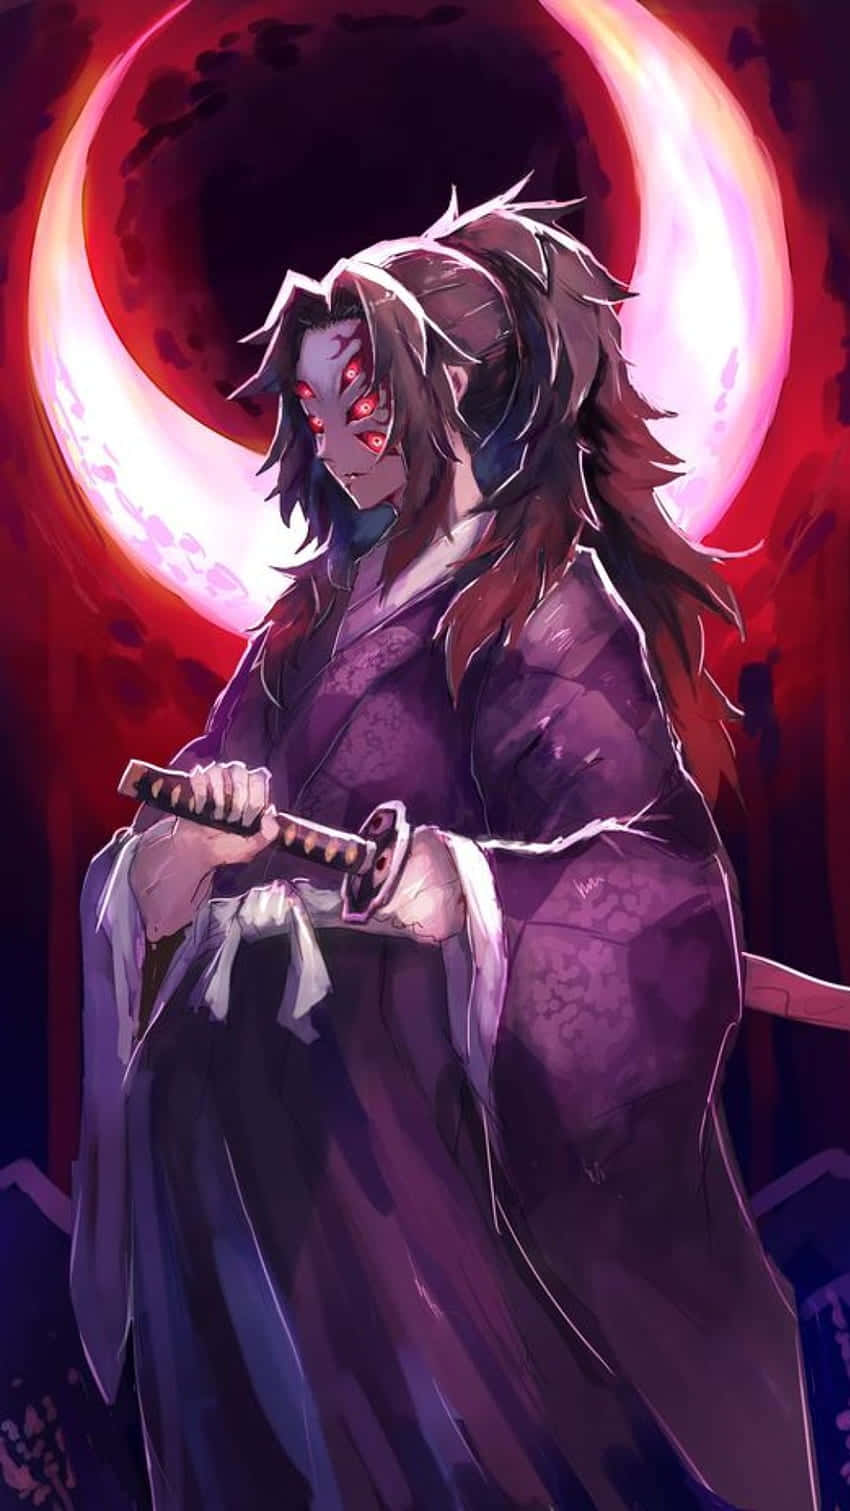 Unleash The Slayer Within With A Demon Slayer-Themed iPhone 11 Wallpaper